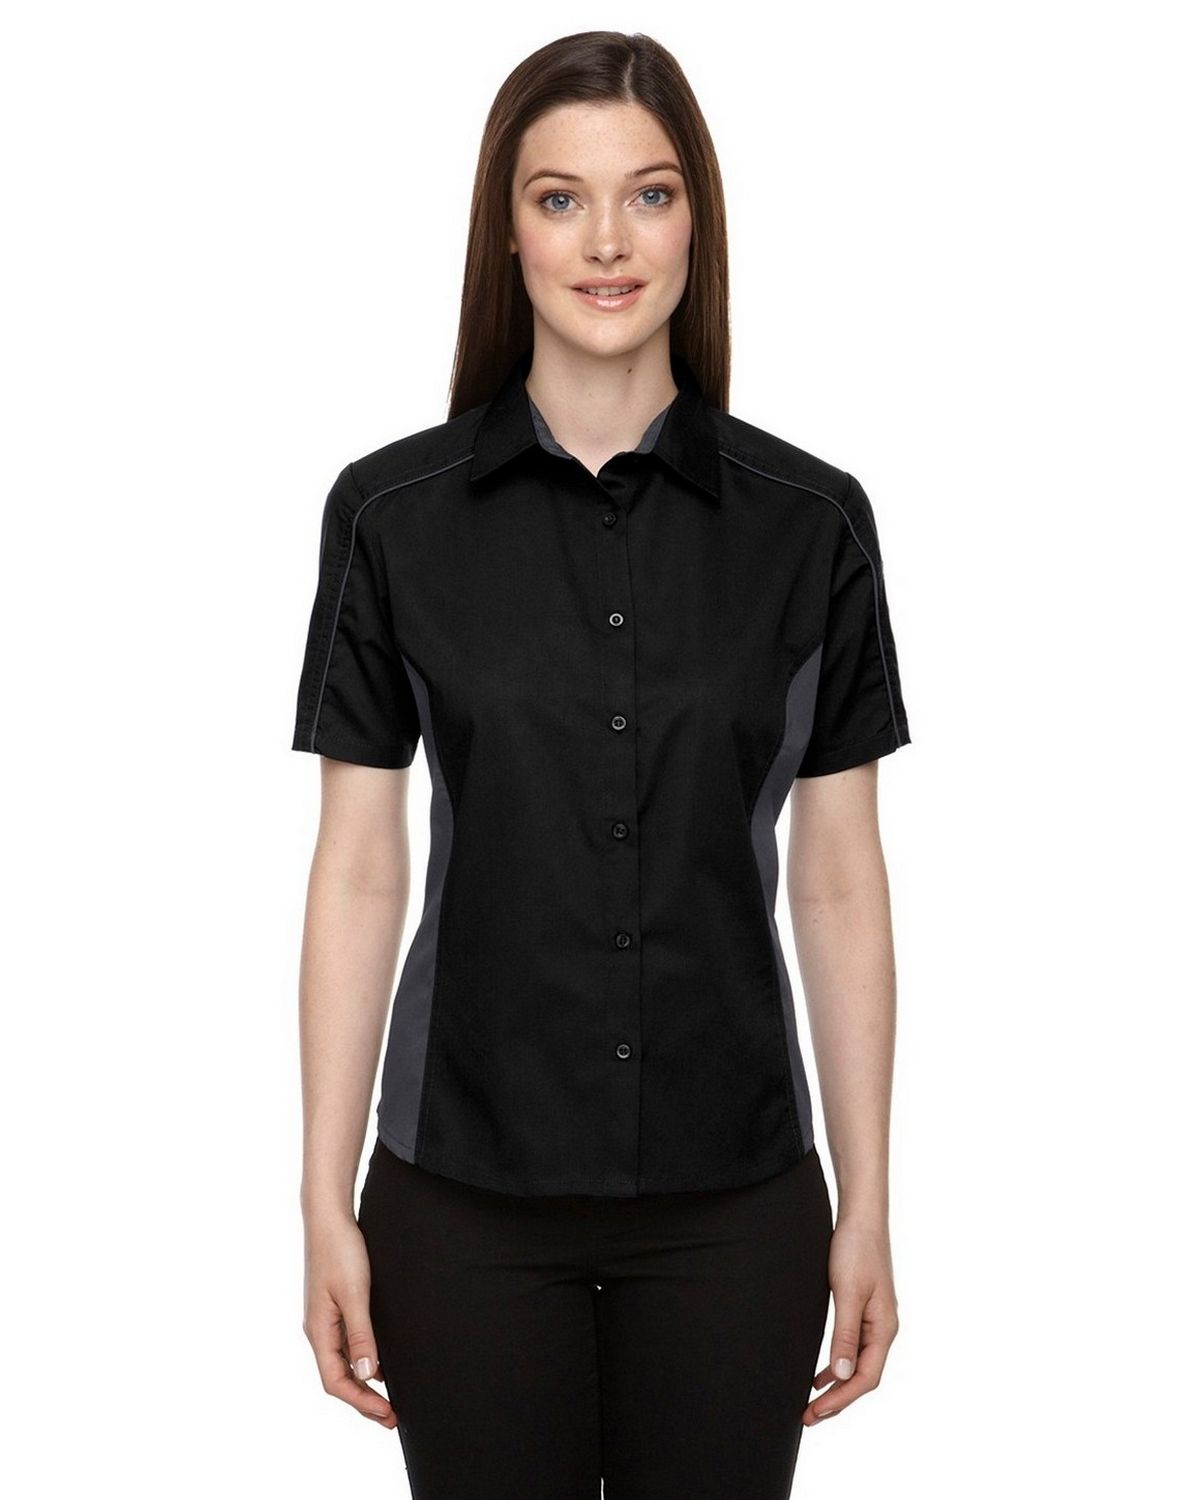 North End Sport Blue 88690 PRECISE Mens Wrinkle Free 2-Ply 80s Cotton Dobby Taped Shirt S BLACK 703 